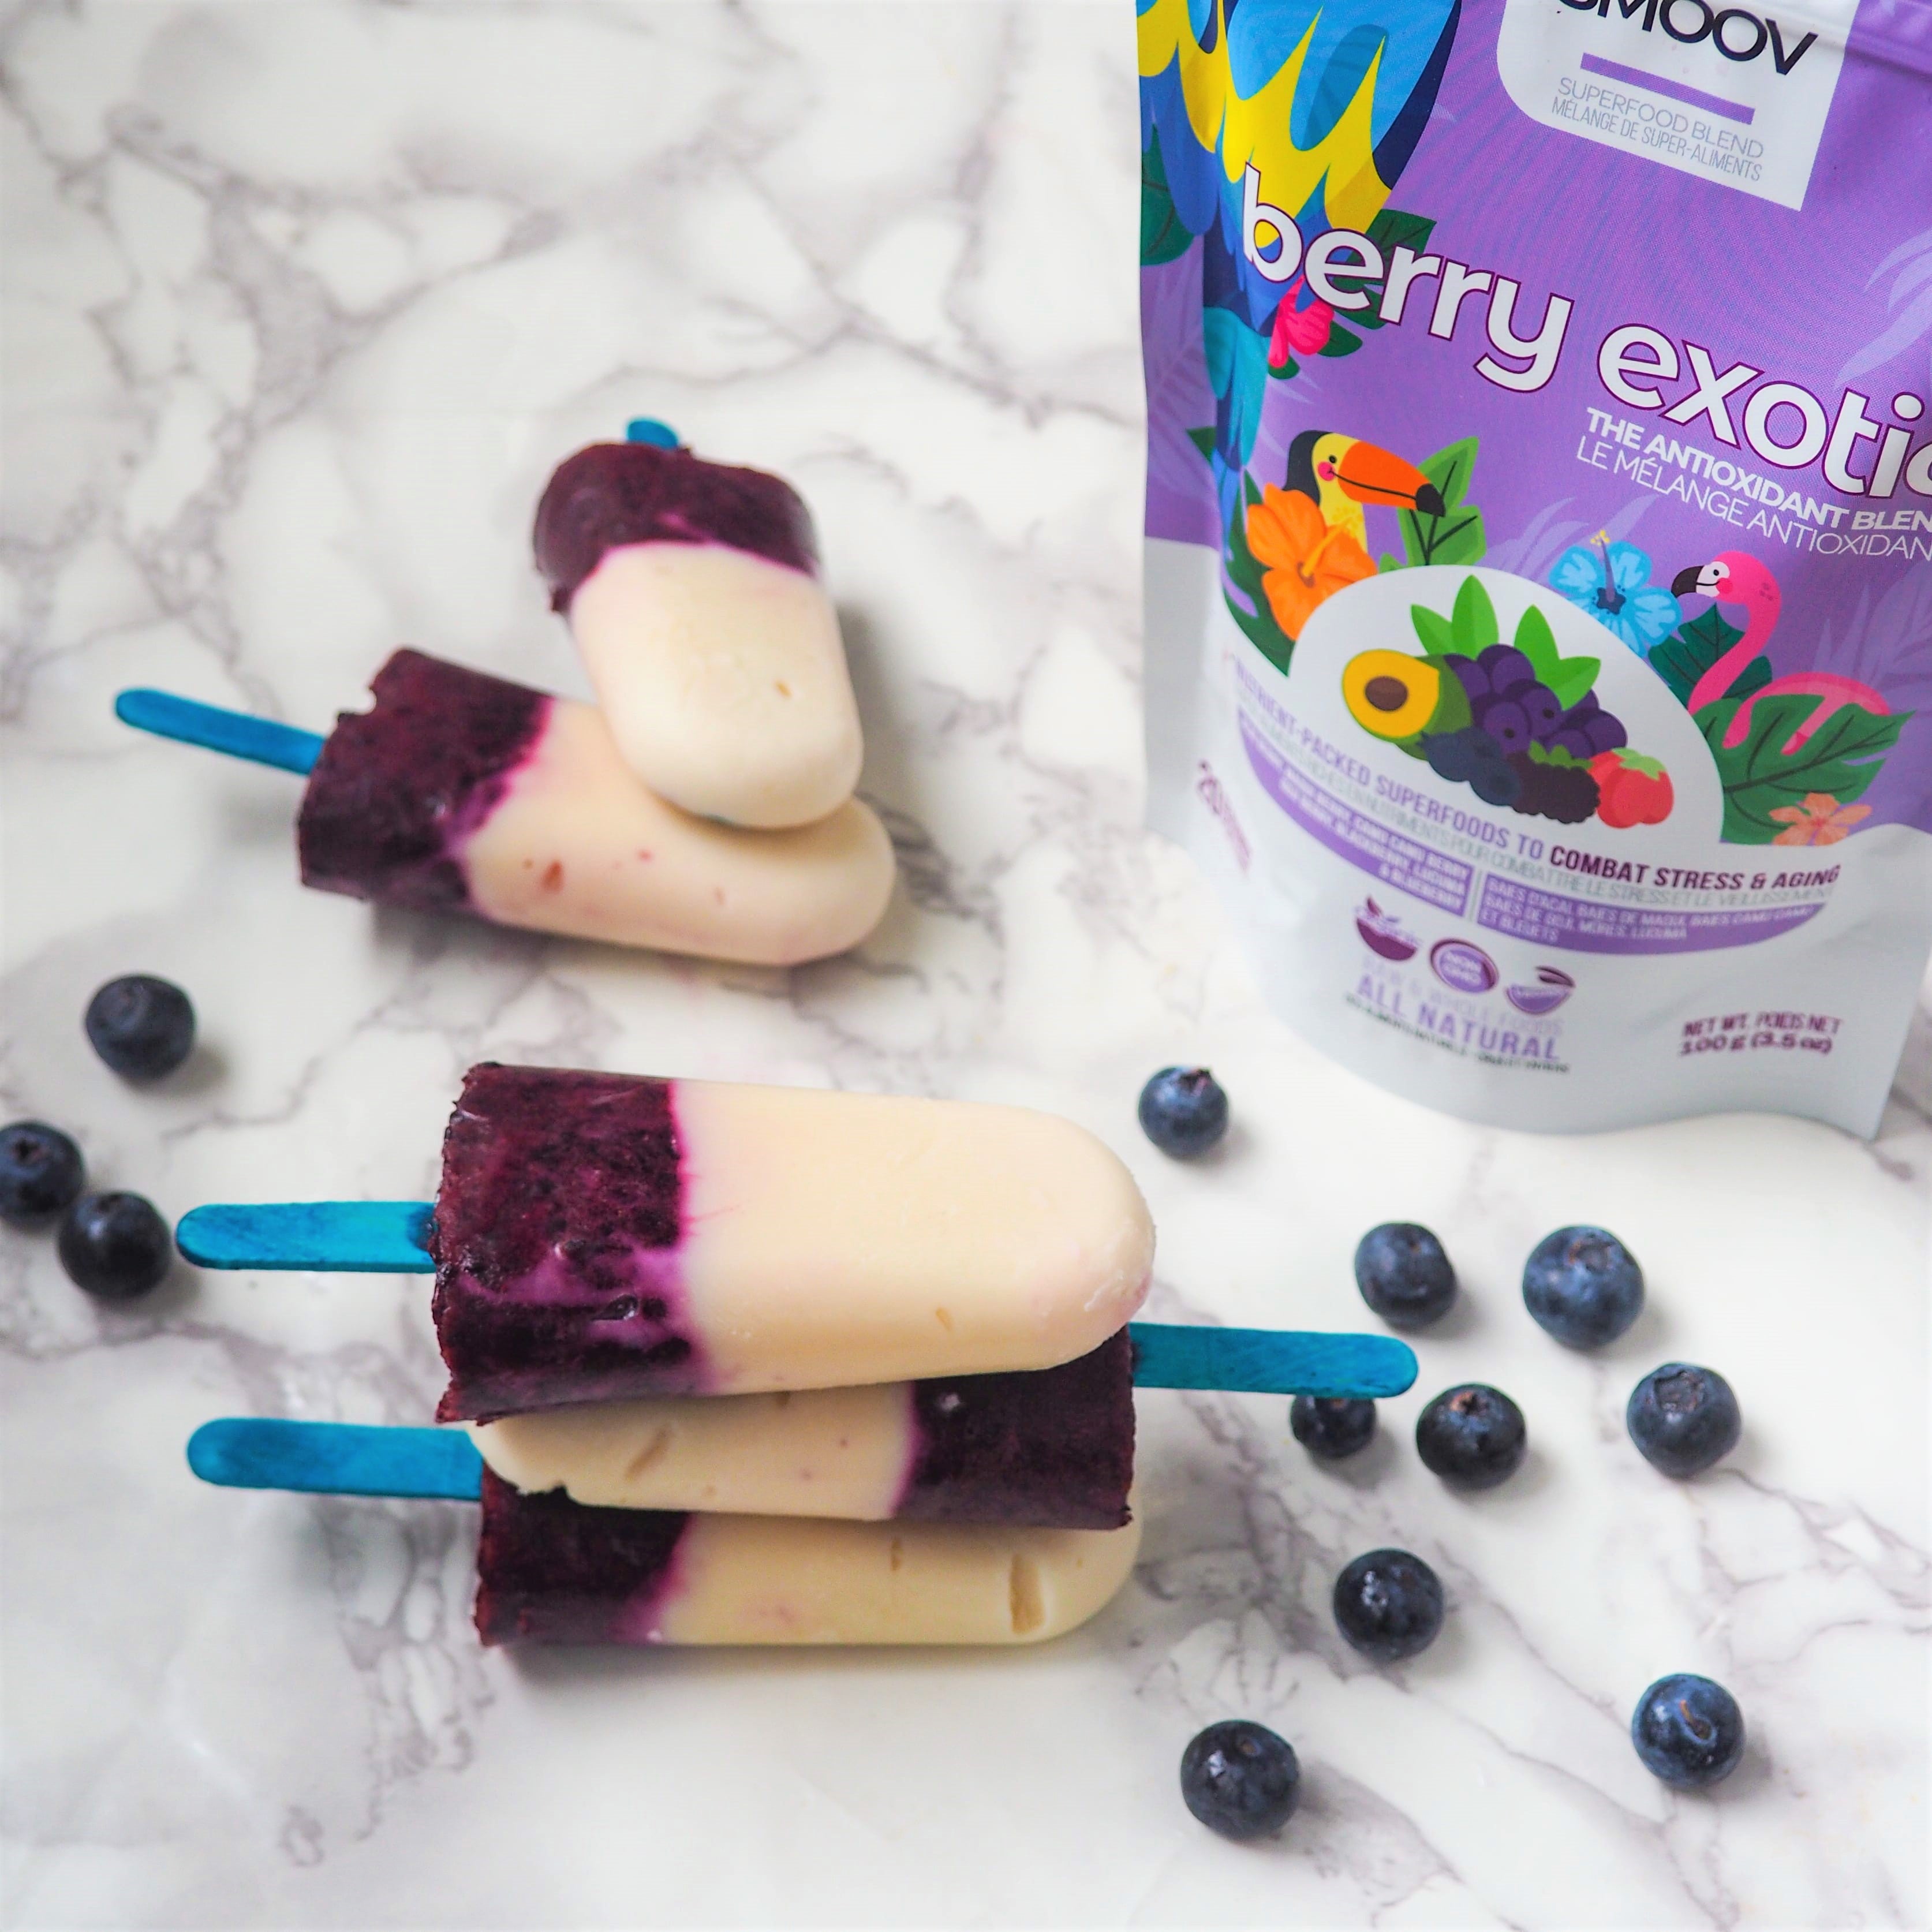 Our berry exotic blend has 8 antioxidant-rich superfoods, 7 of which are some of the world's most nutritious berries. Acai berry, Maqui berry, Red & Black Goji berry, Camu Camu berry, Blueberry, Blackberry & Lucuma.